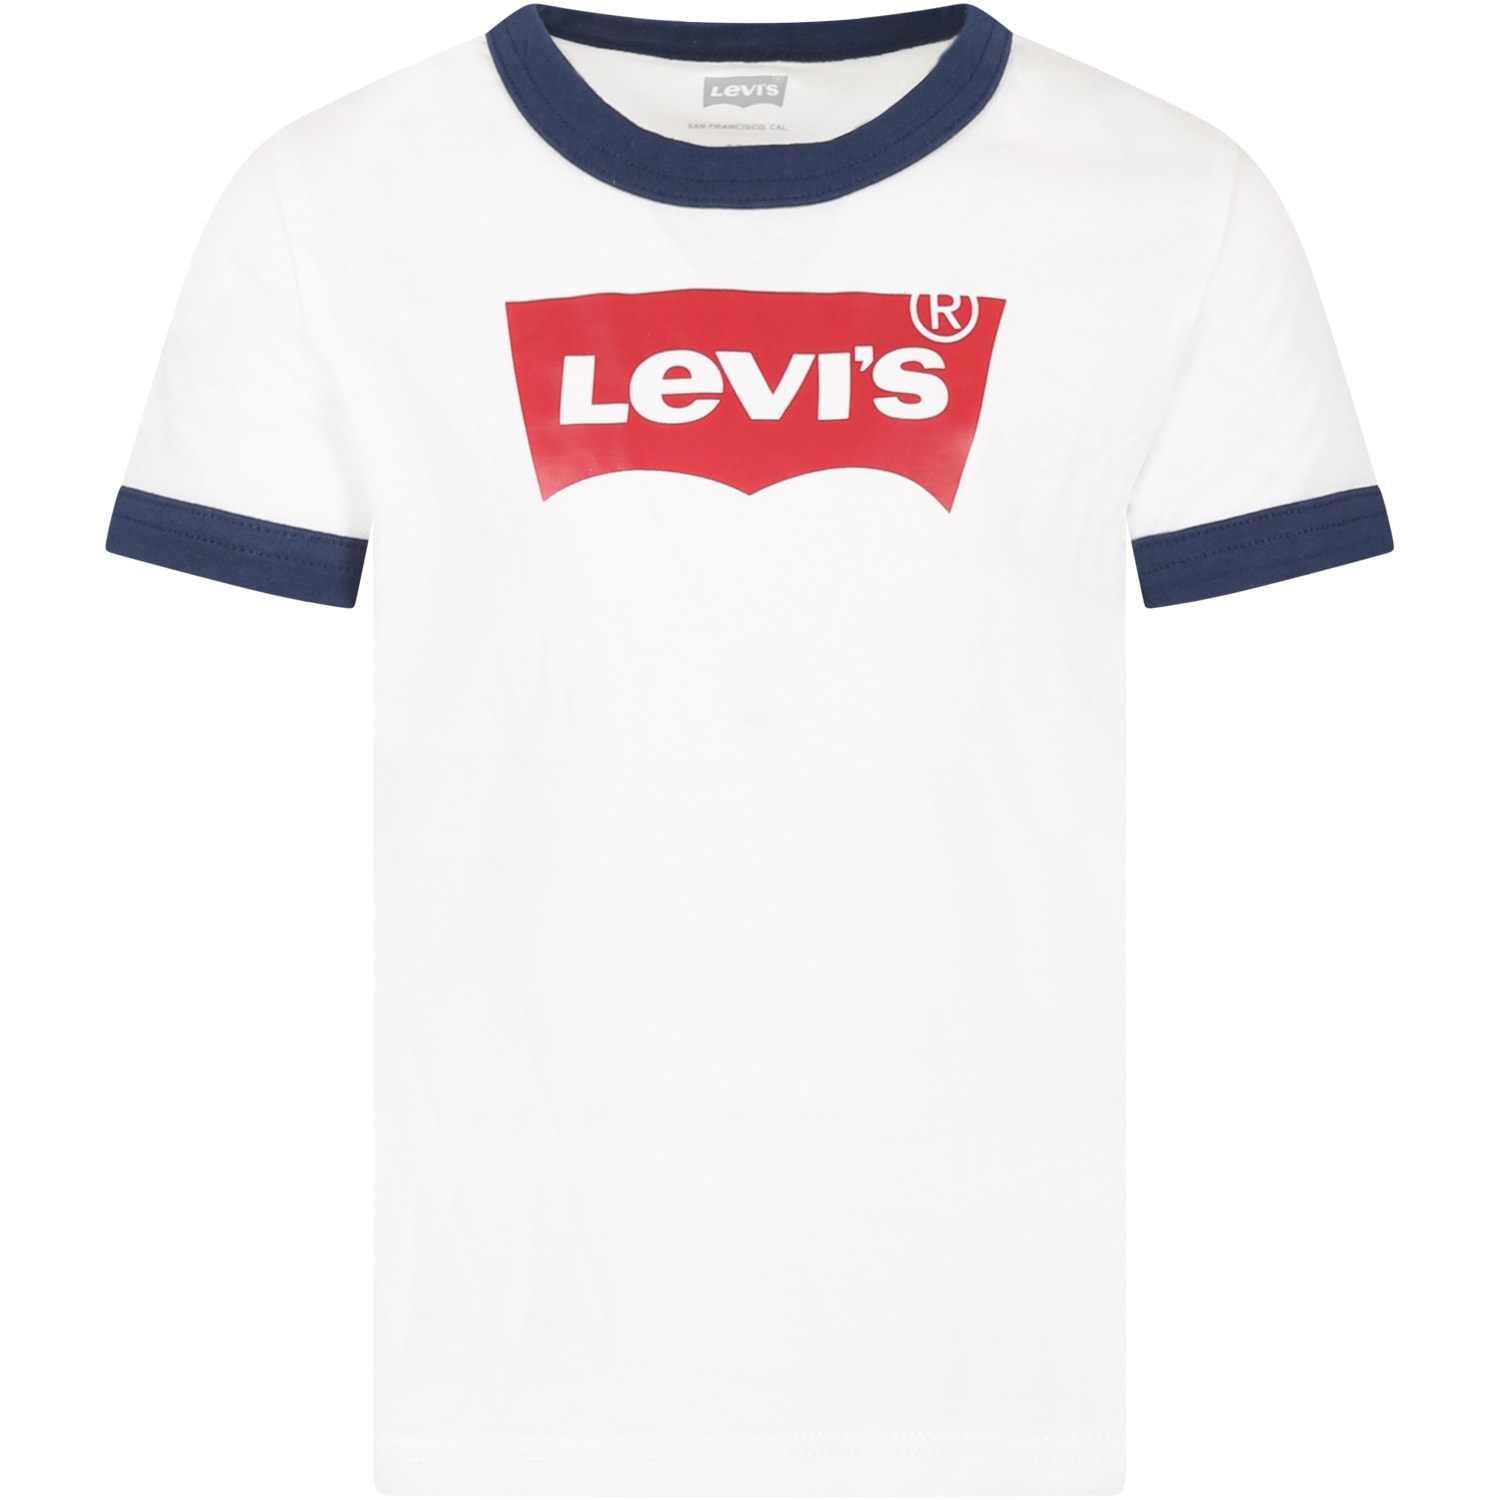 Levi's Kids' White T-shirt For Girl With Logo